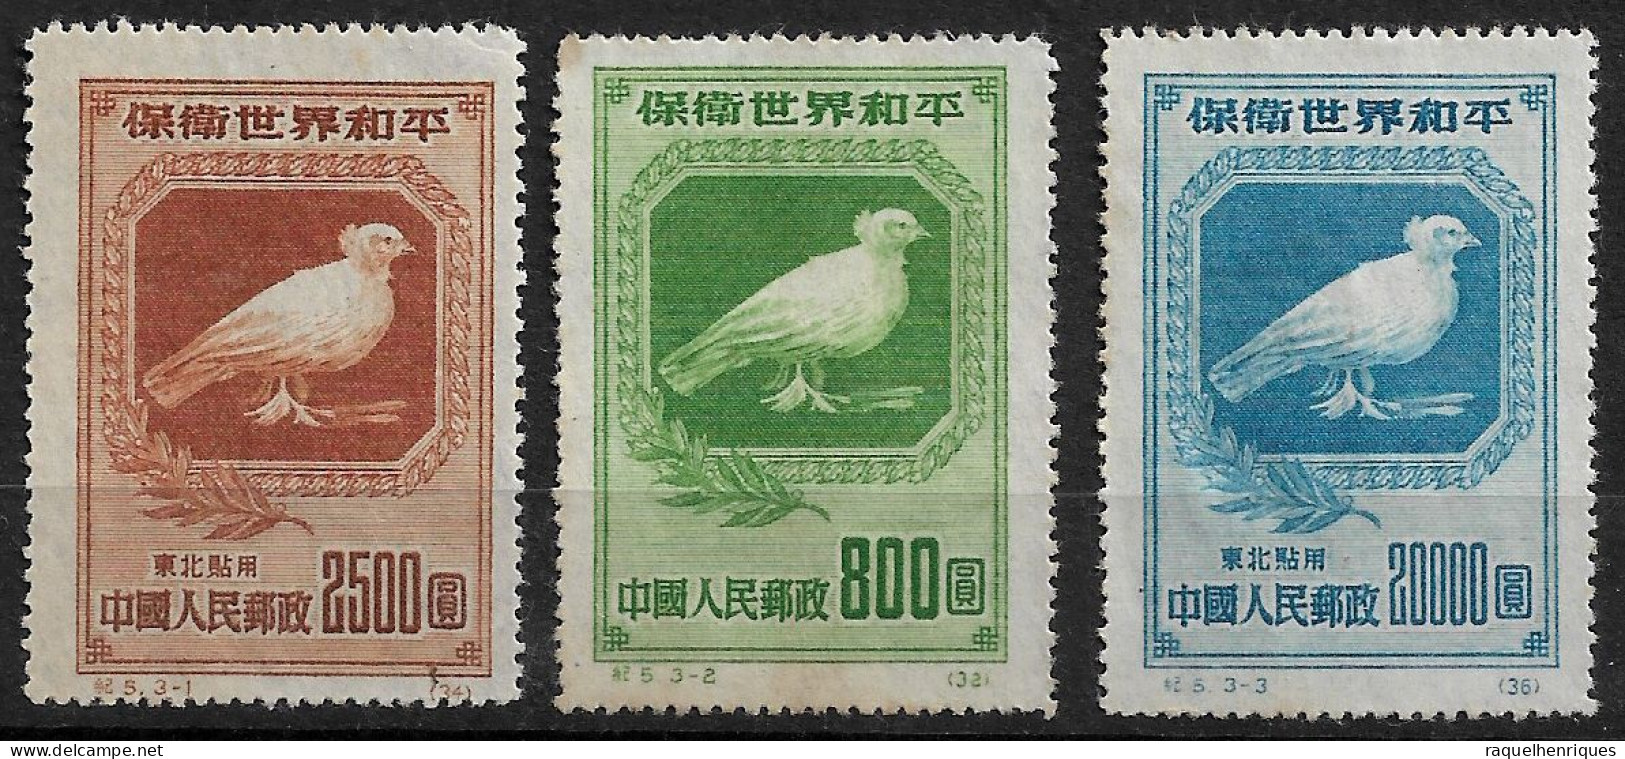 CHINA Northeast China 1950 Peace Dove And Olive Branch MH ISSUED NG (NP#72-P30-L3) - Cina Del Nord-Est 1946-48